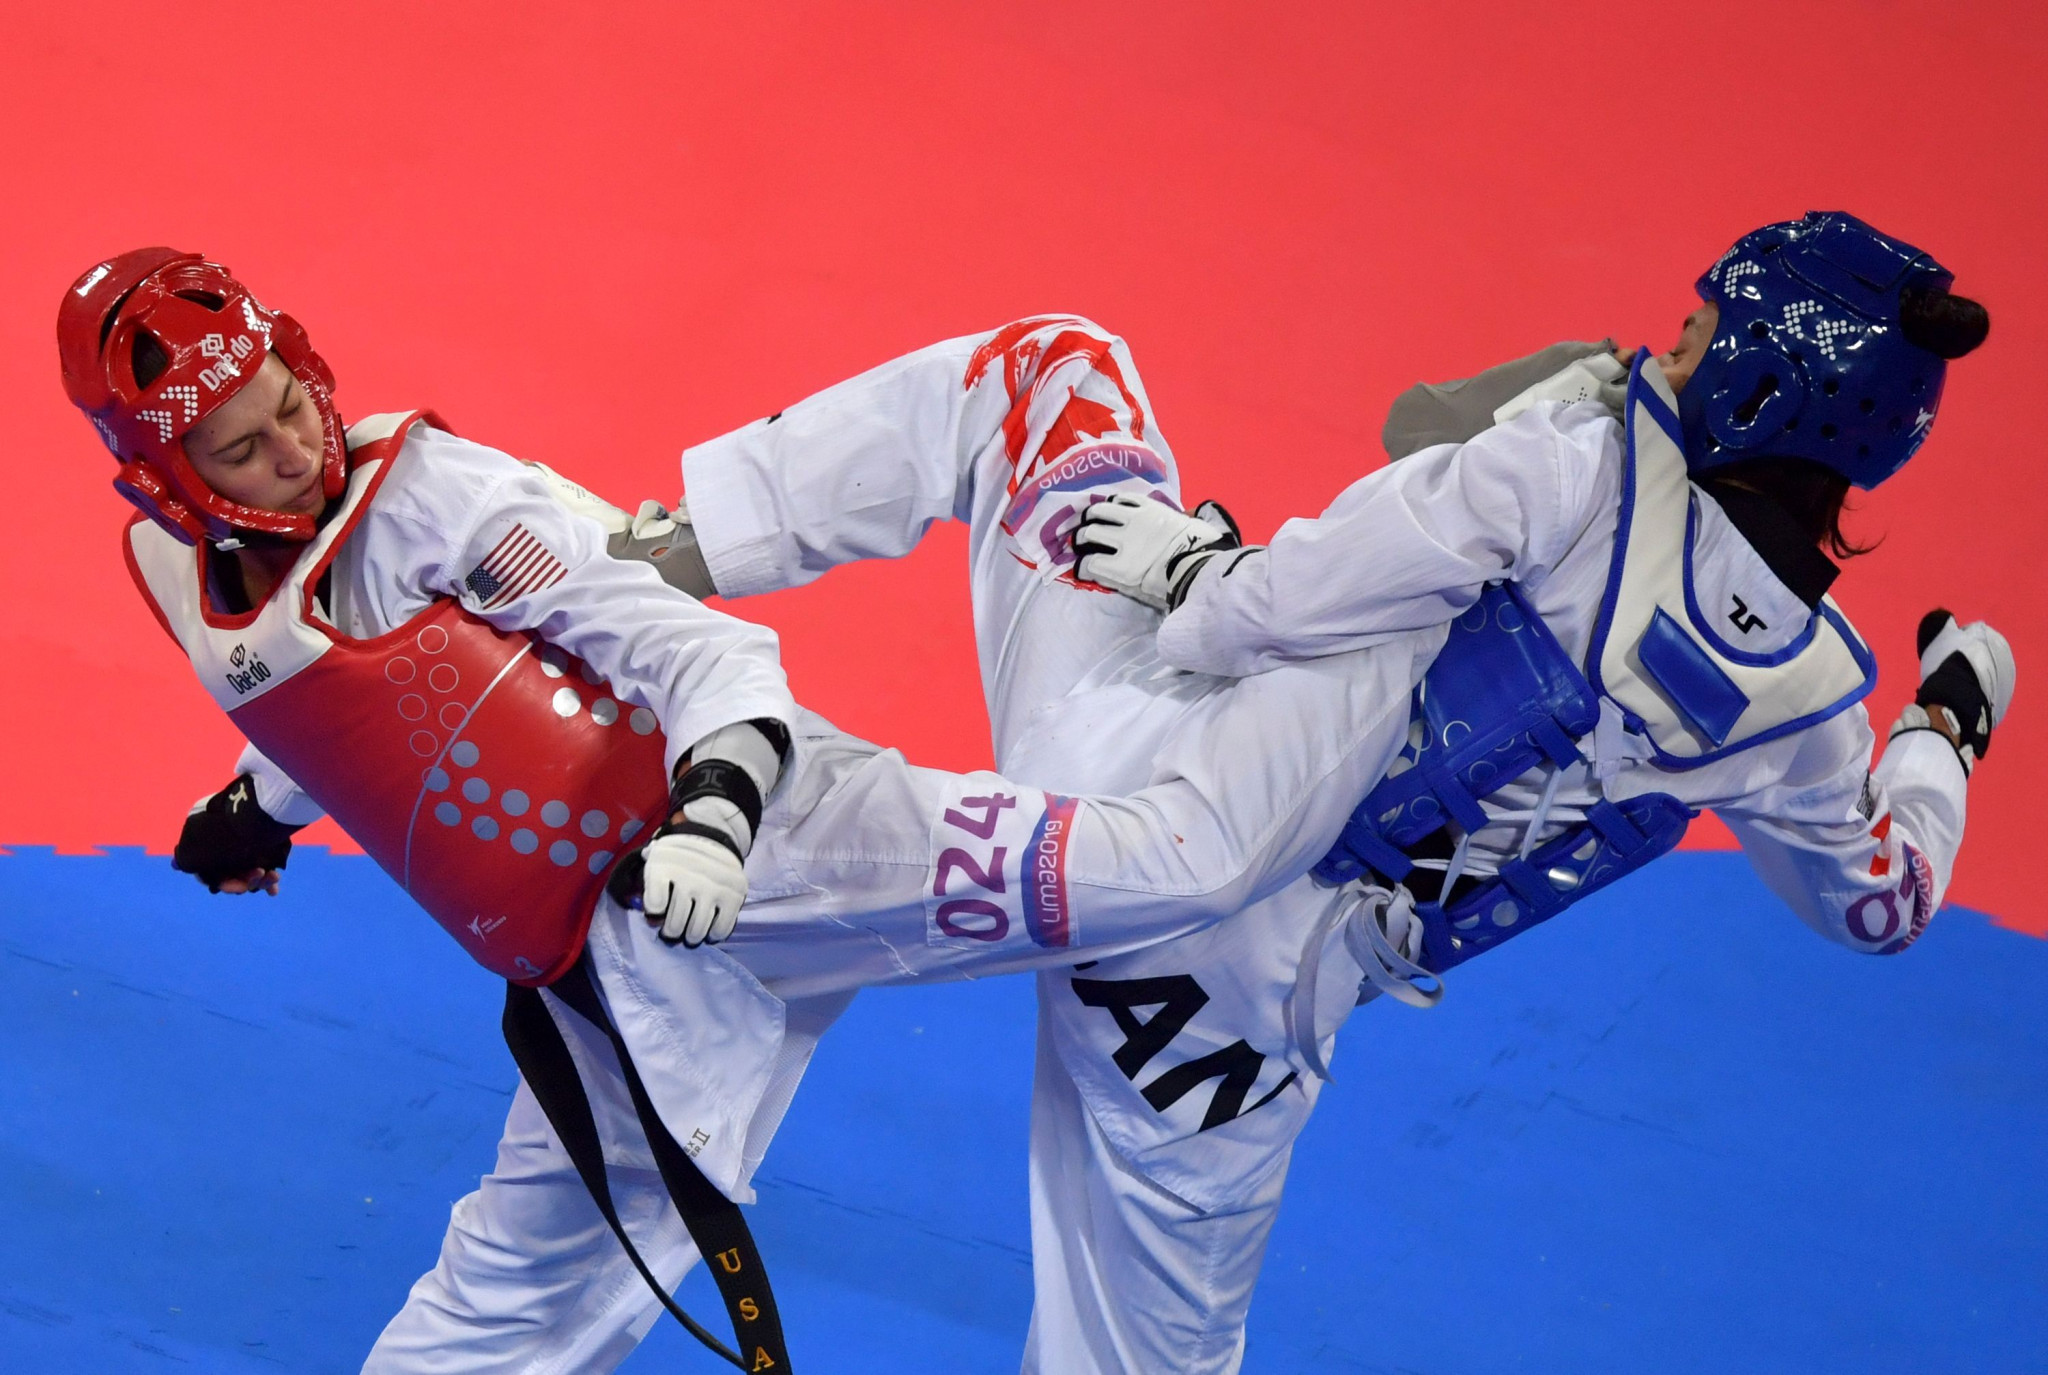 Skylar Park, right, won World Championship bronze and Pan American Games silver last year ©Getty Images